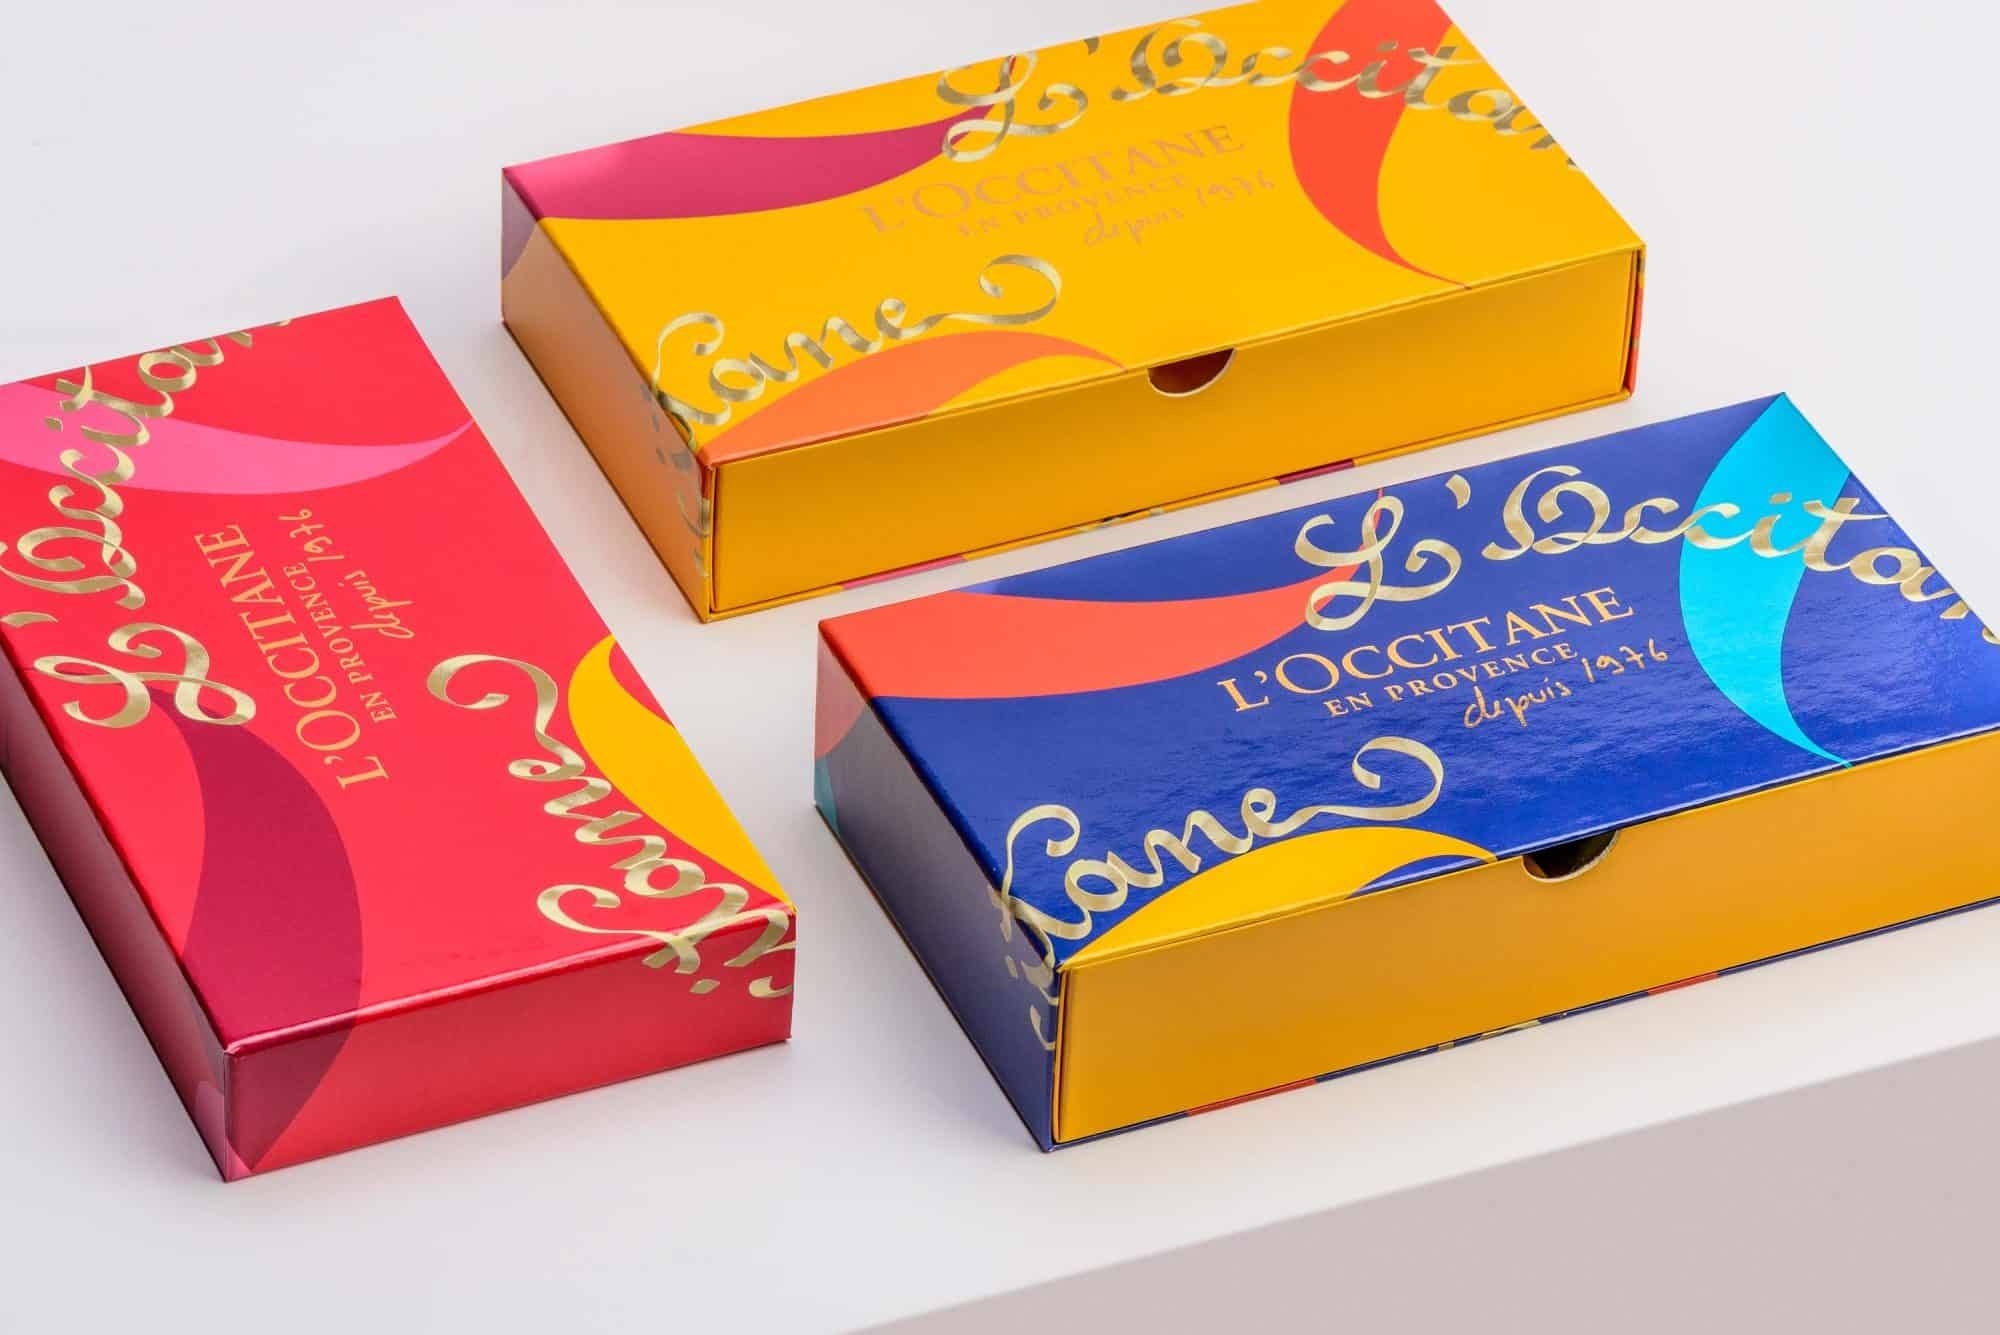 Bespoke L'Occitane folding gift box and carton packaging for ecommerce products